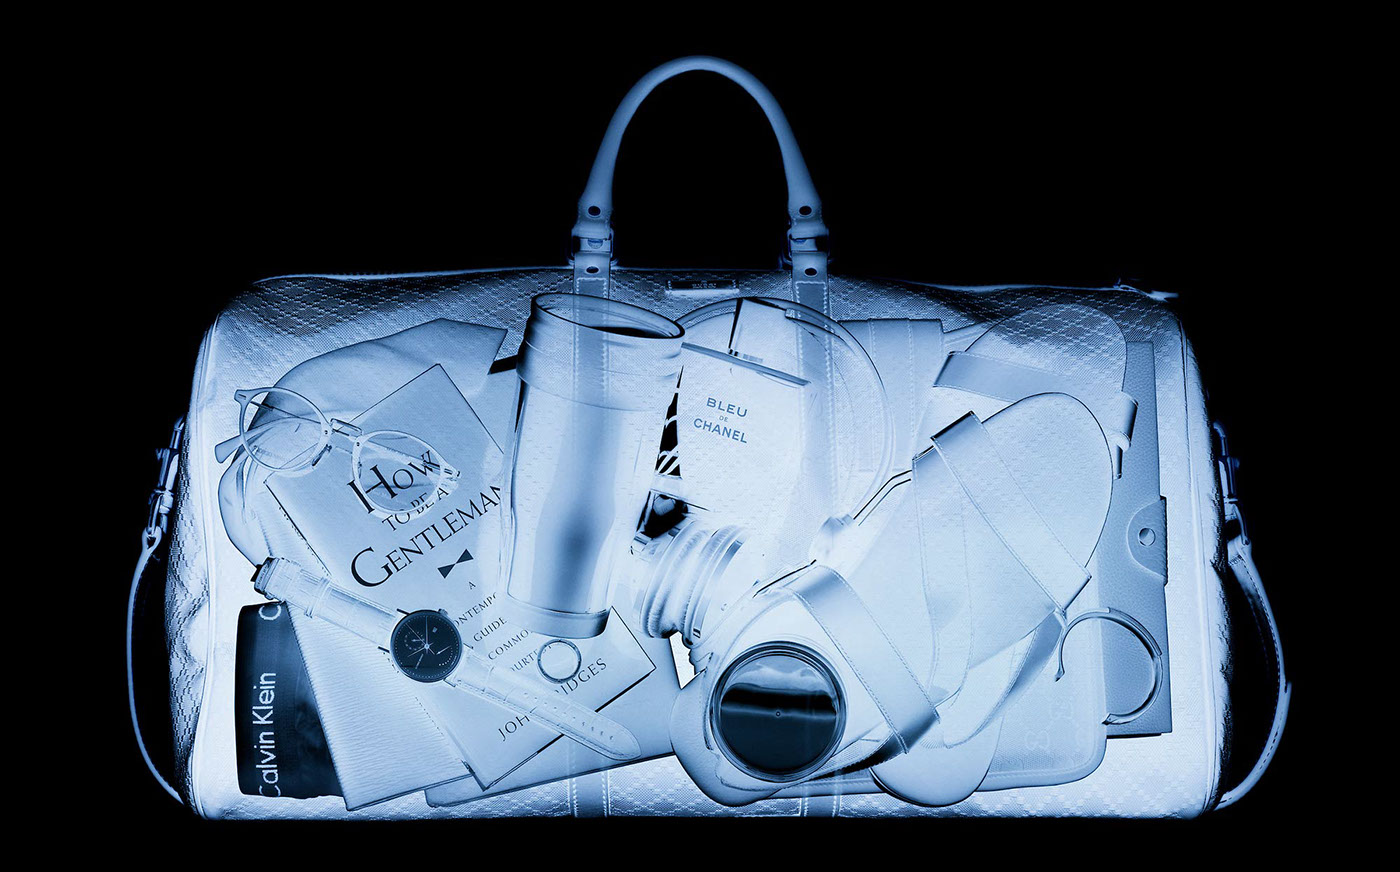 accessories xray bag product Photography  still life daniellindh Watches Travel